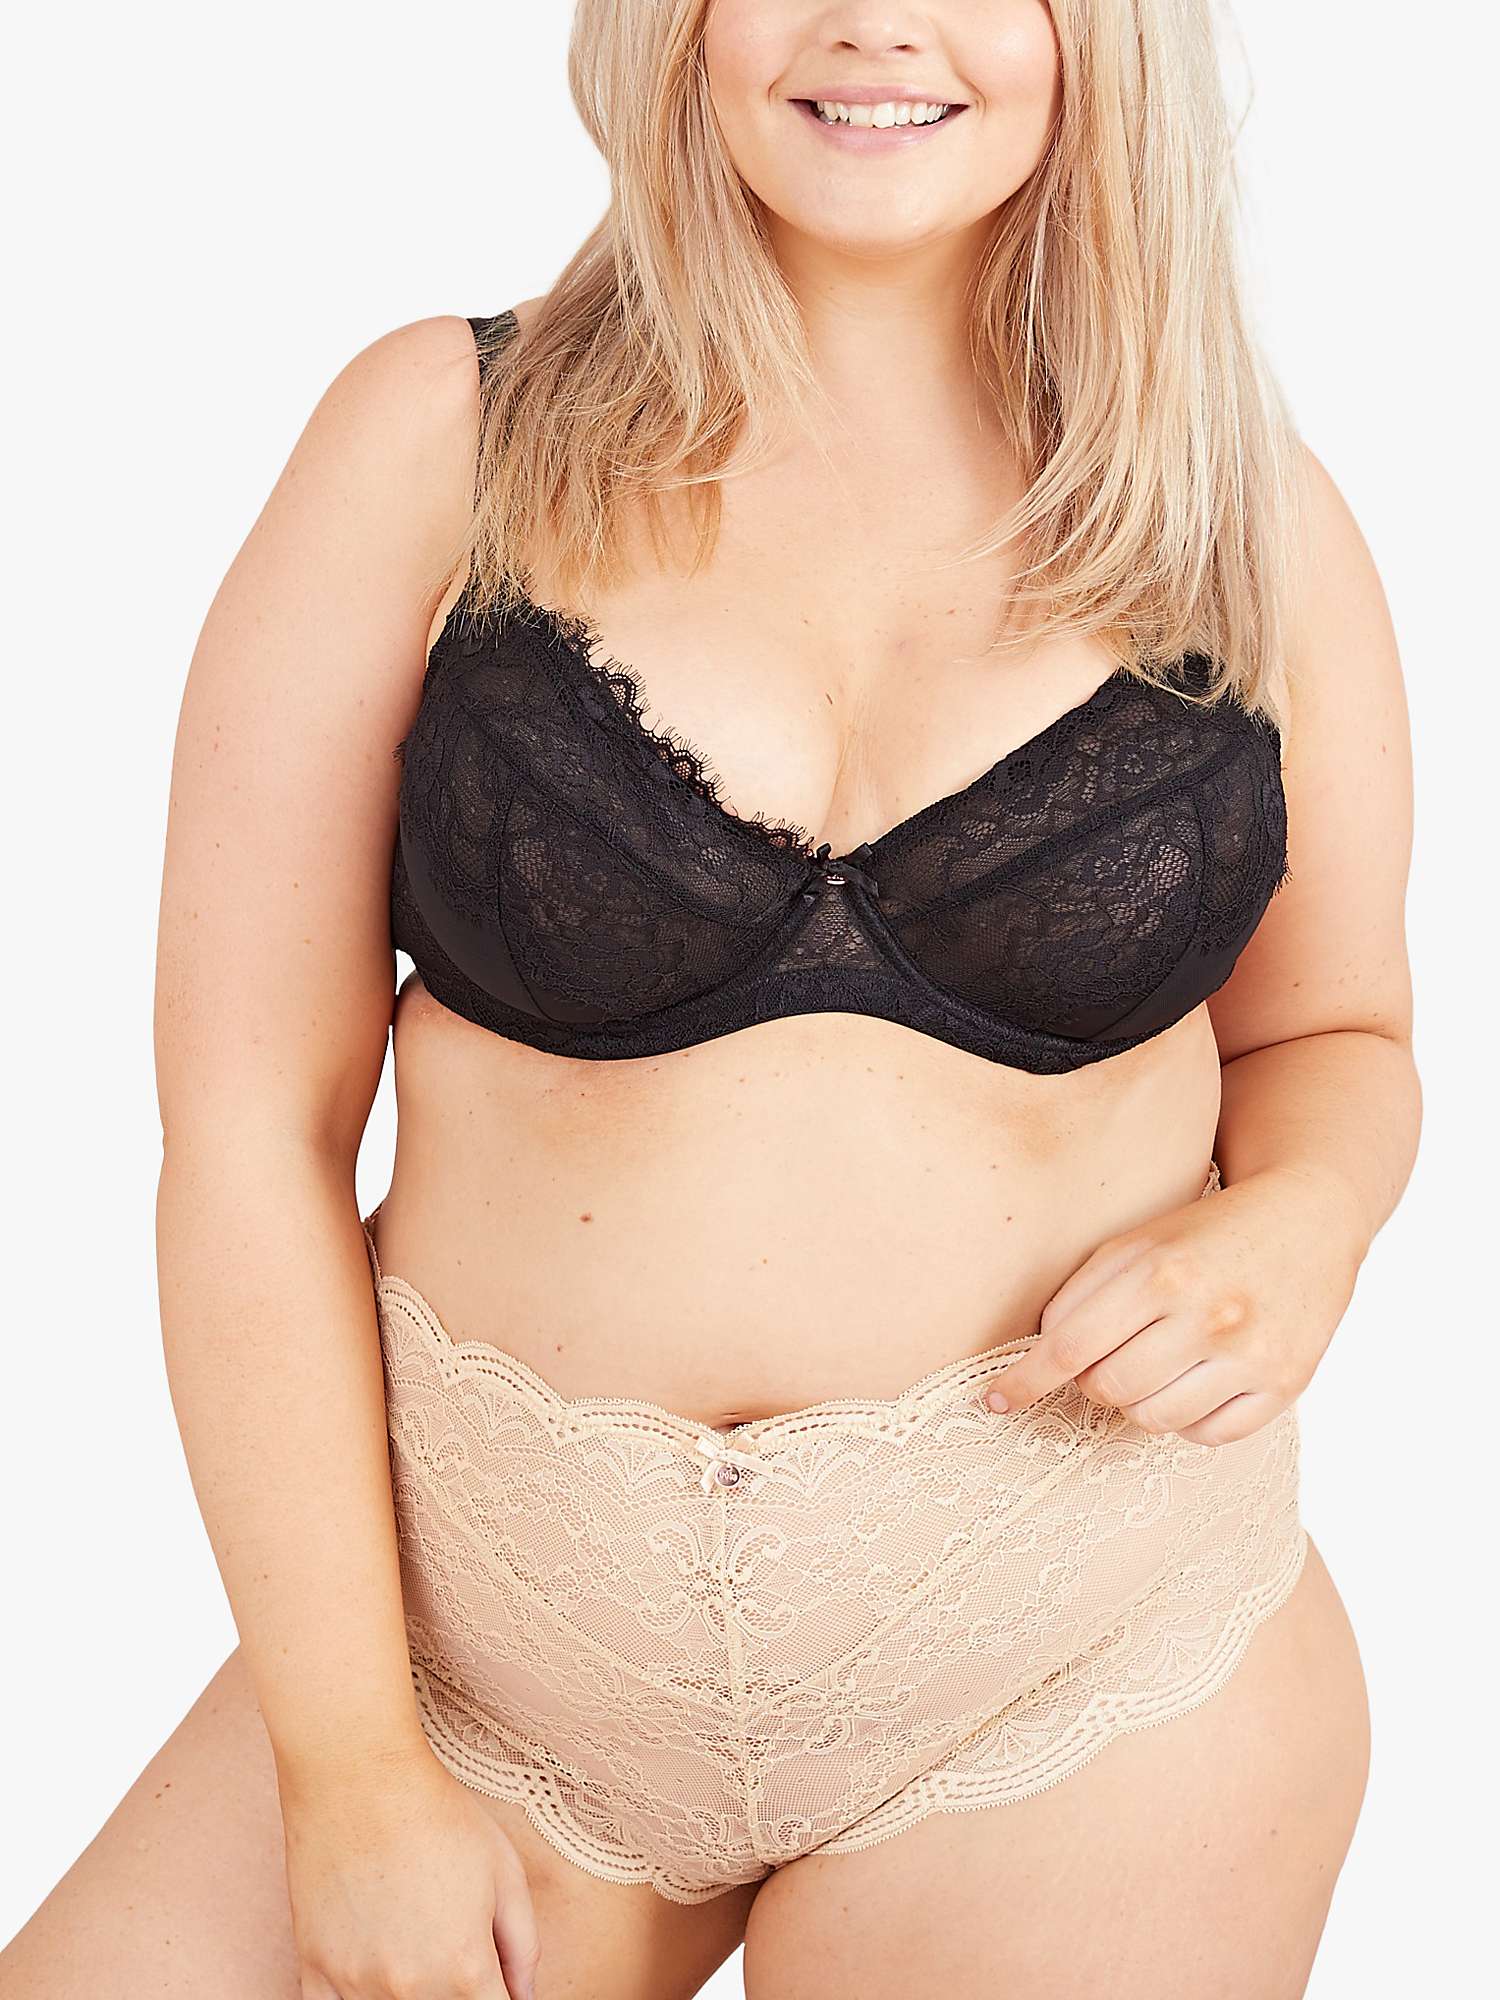 Buy Oola Lingerie Scallop Lace Short Knickers Online at johnlewis.com